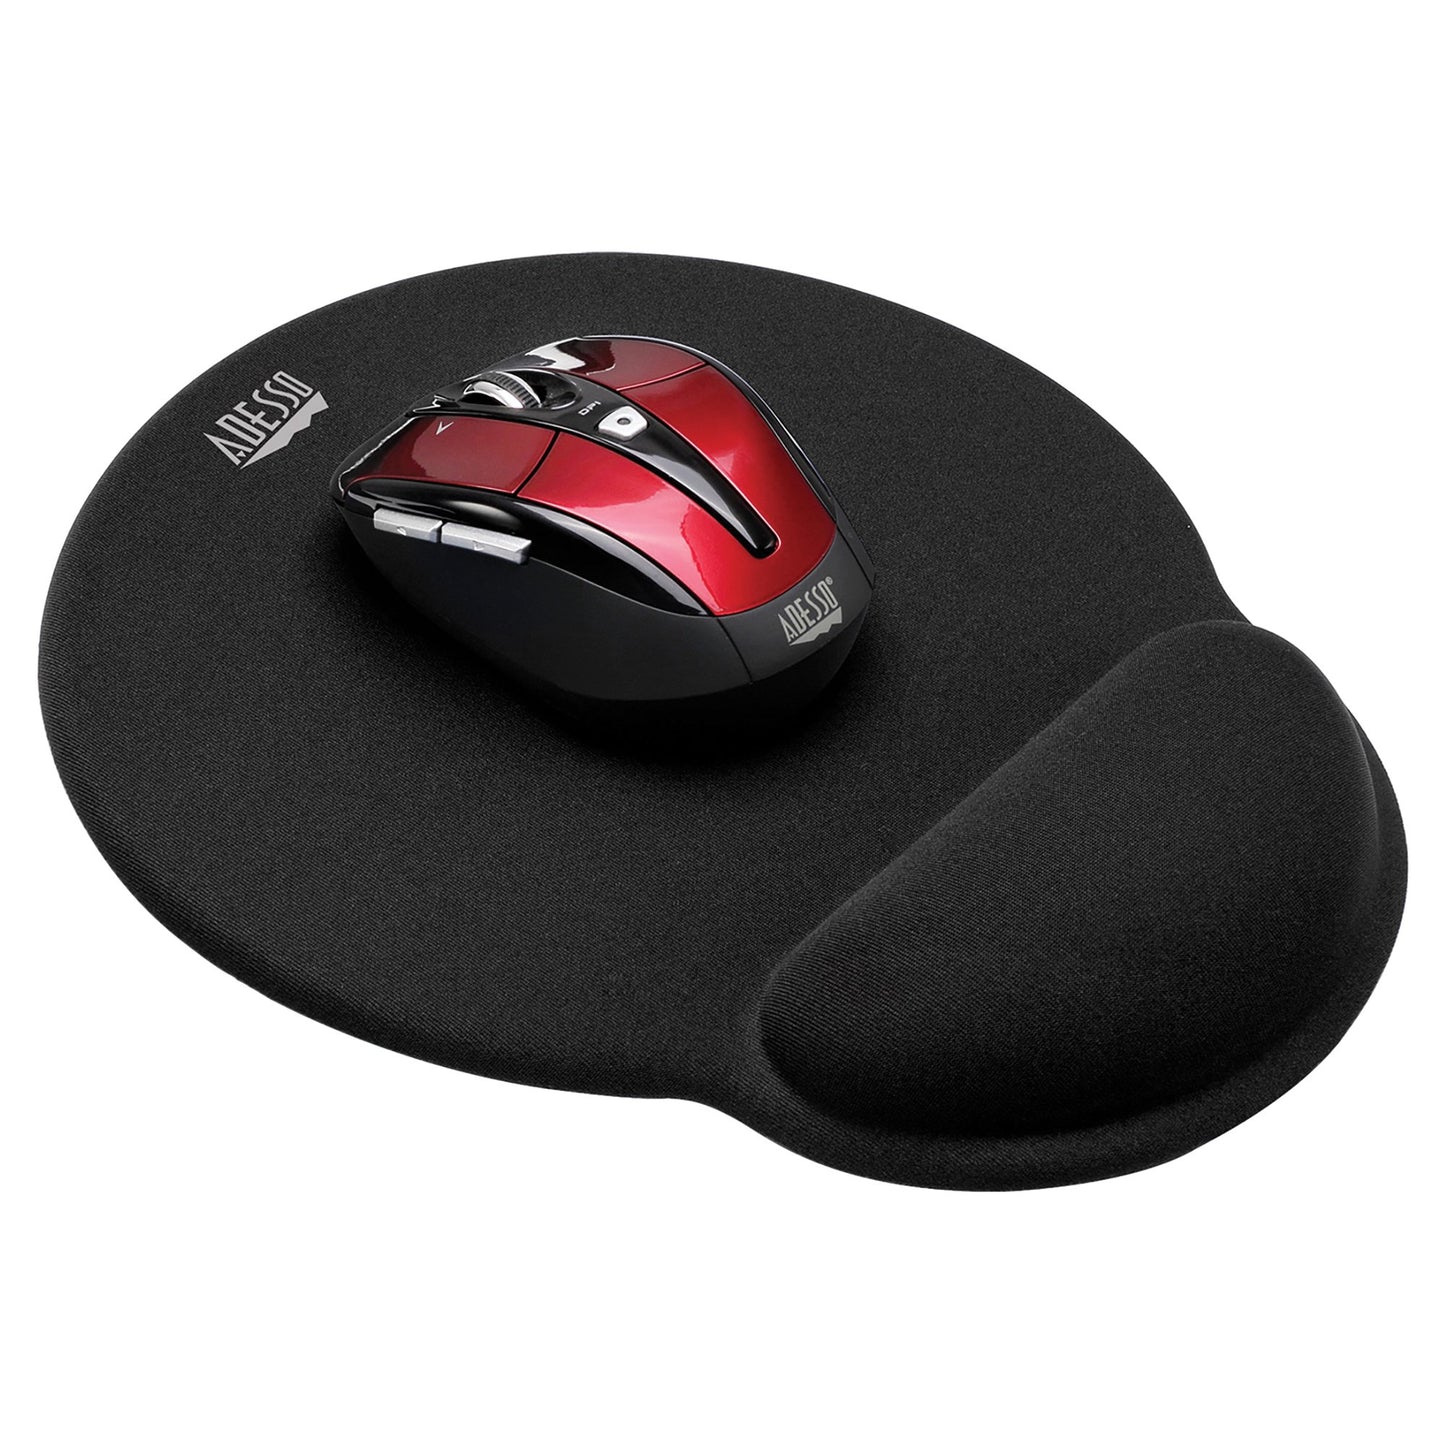 Adesso TRUFORM P200 TRUFORM P200 Mouse Pad with Memory Foam Wrist Support